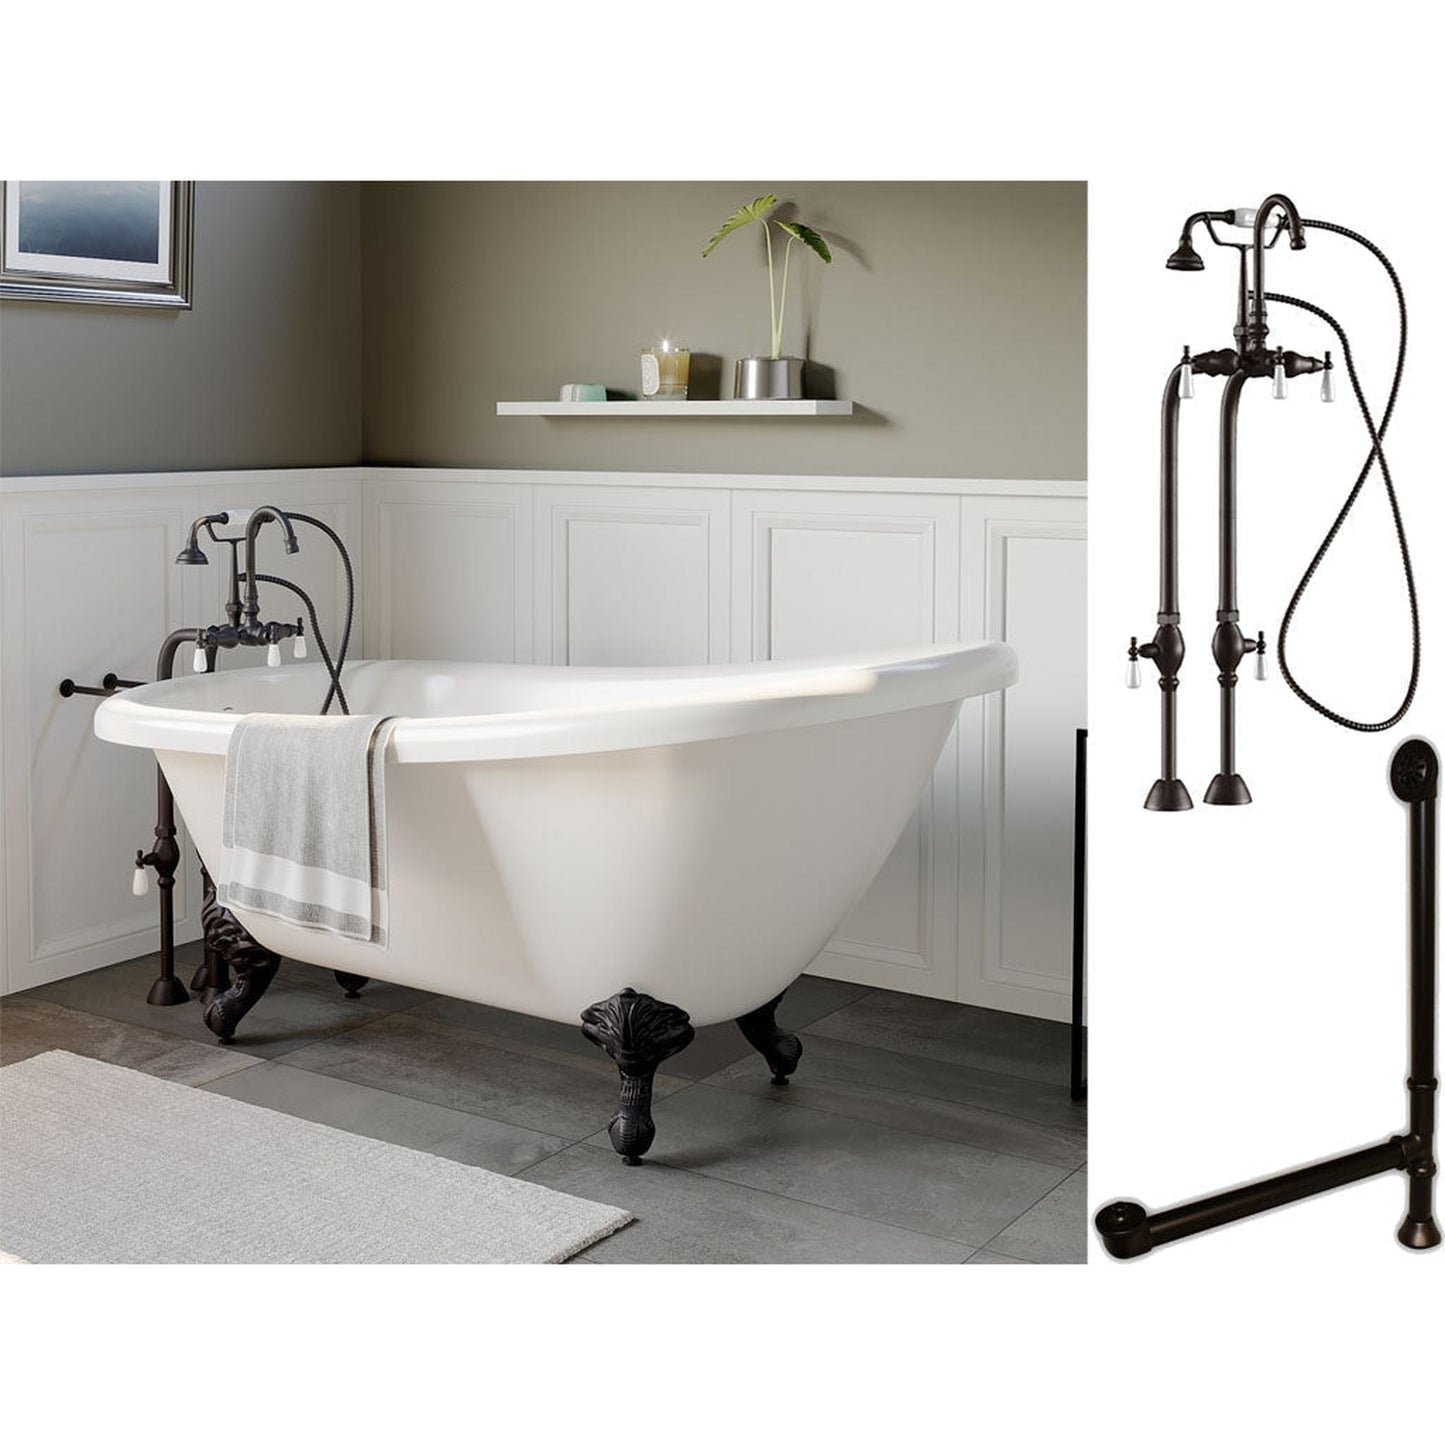 Cambridge Plumbing 67" White Acrylic Single Slipper Clawfeet Bathtub With No Deck Holes And Complete Plumbing Package Including Freestanding English Telephone Gooseneck Faucet, Supply Lines, Drain And Overflow Assembly In Oil Rubbed Bronze